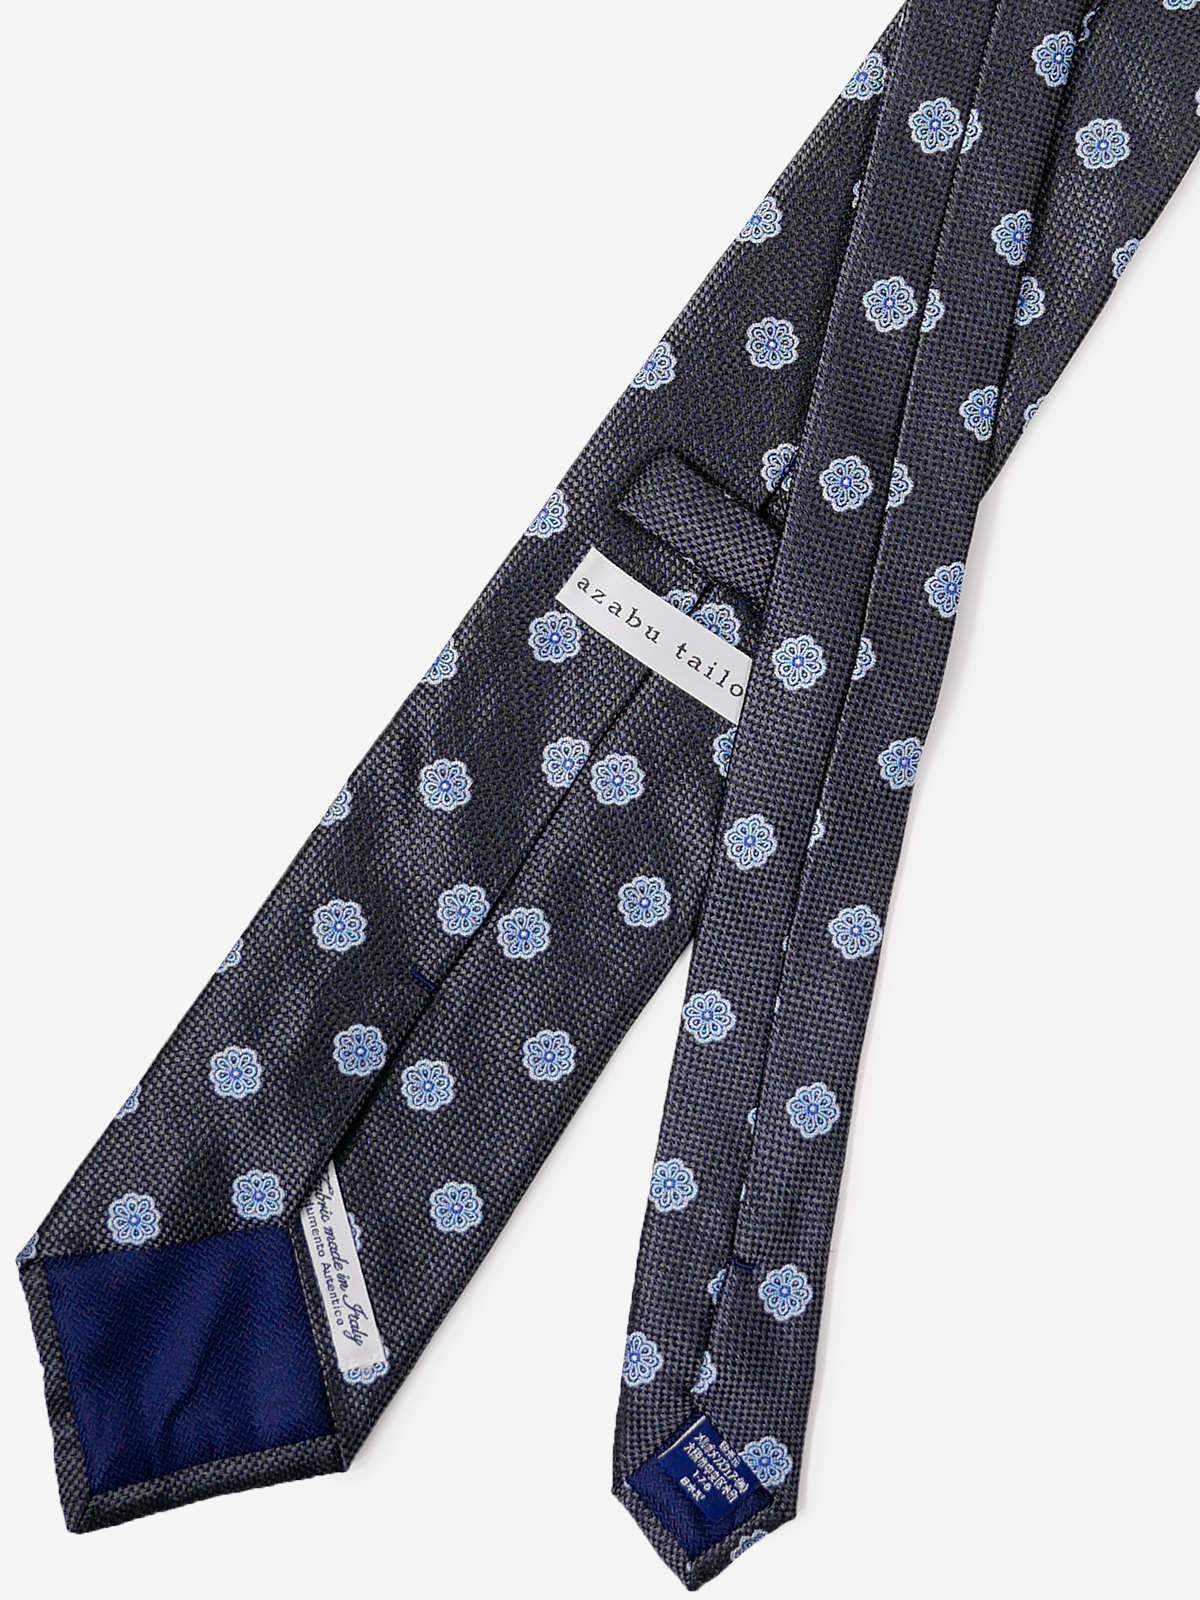 Canepa｜Floral Medallion Tie｜グレー